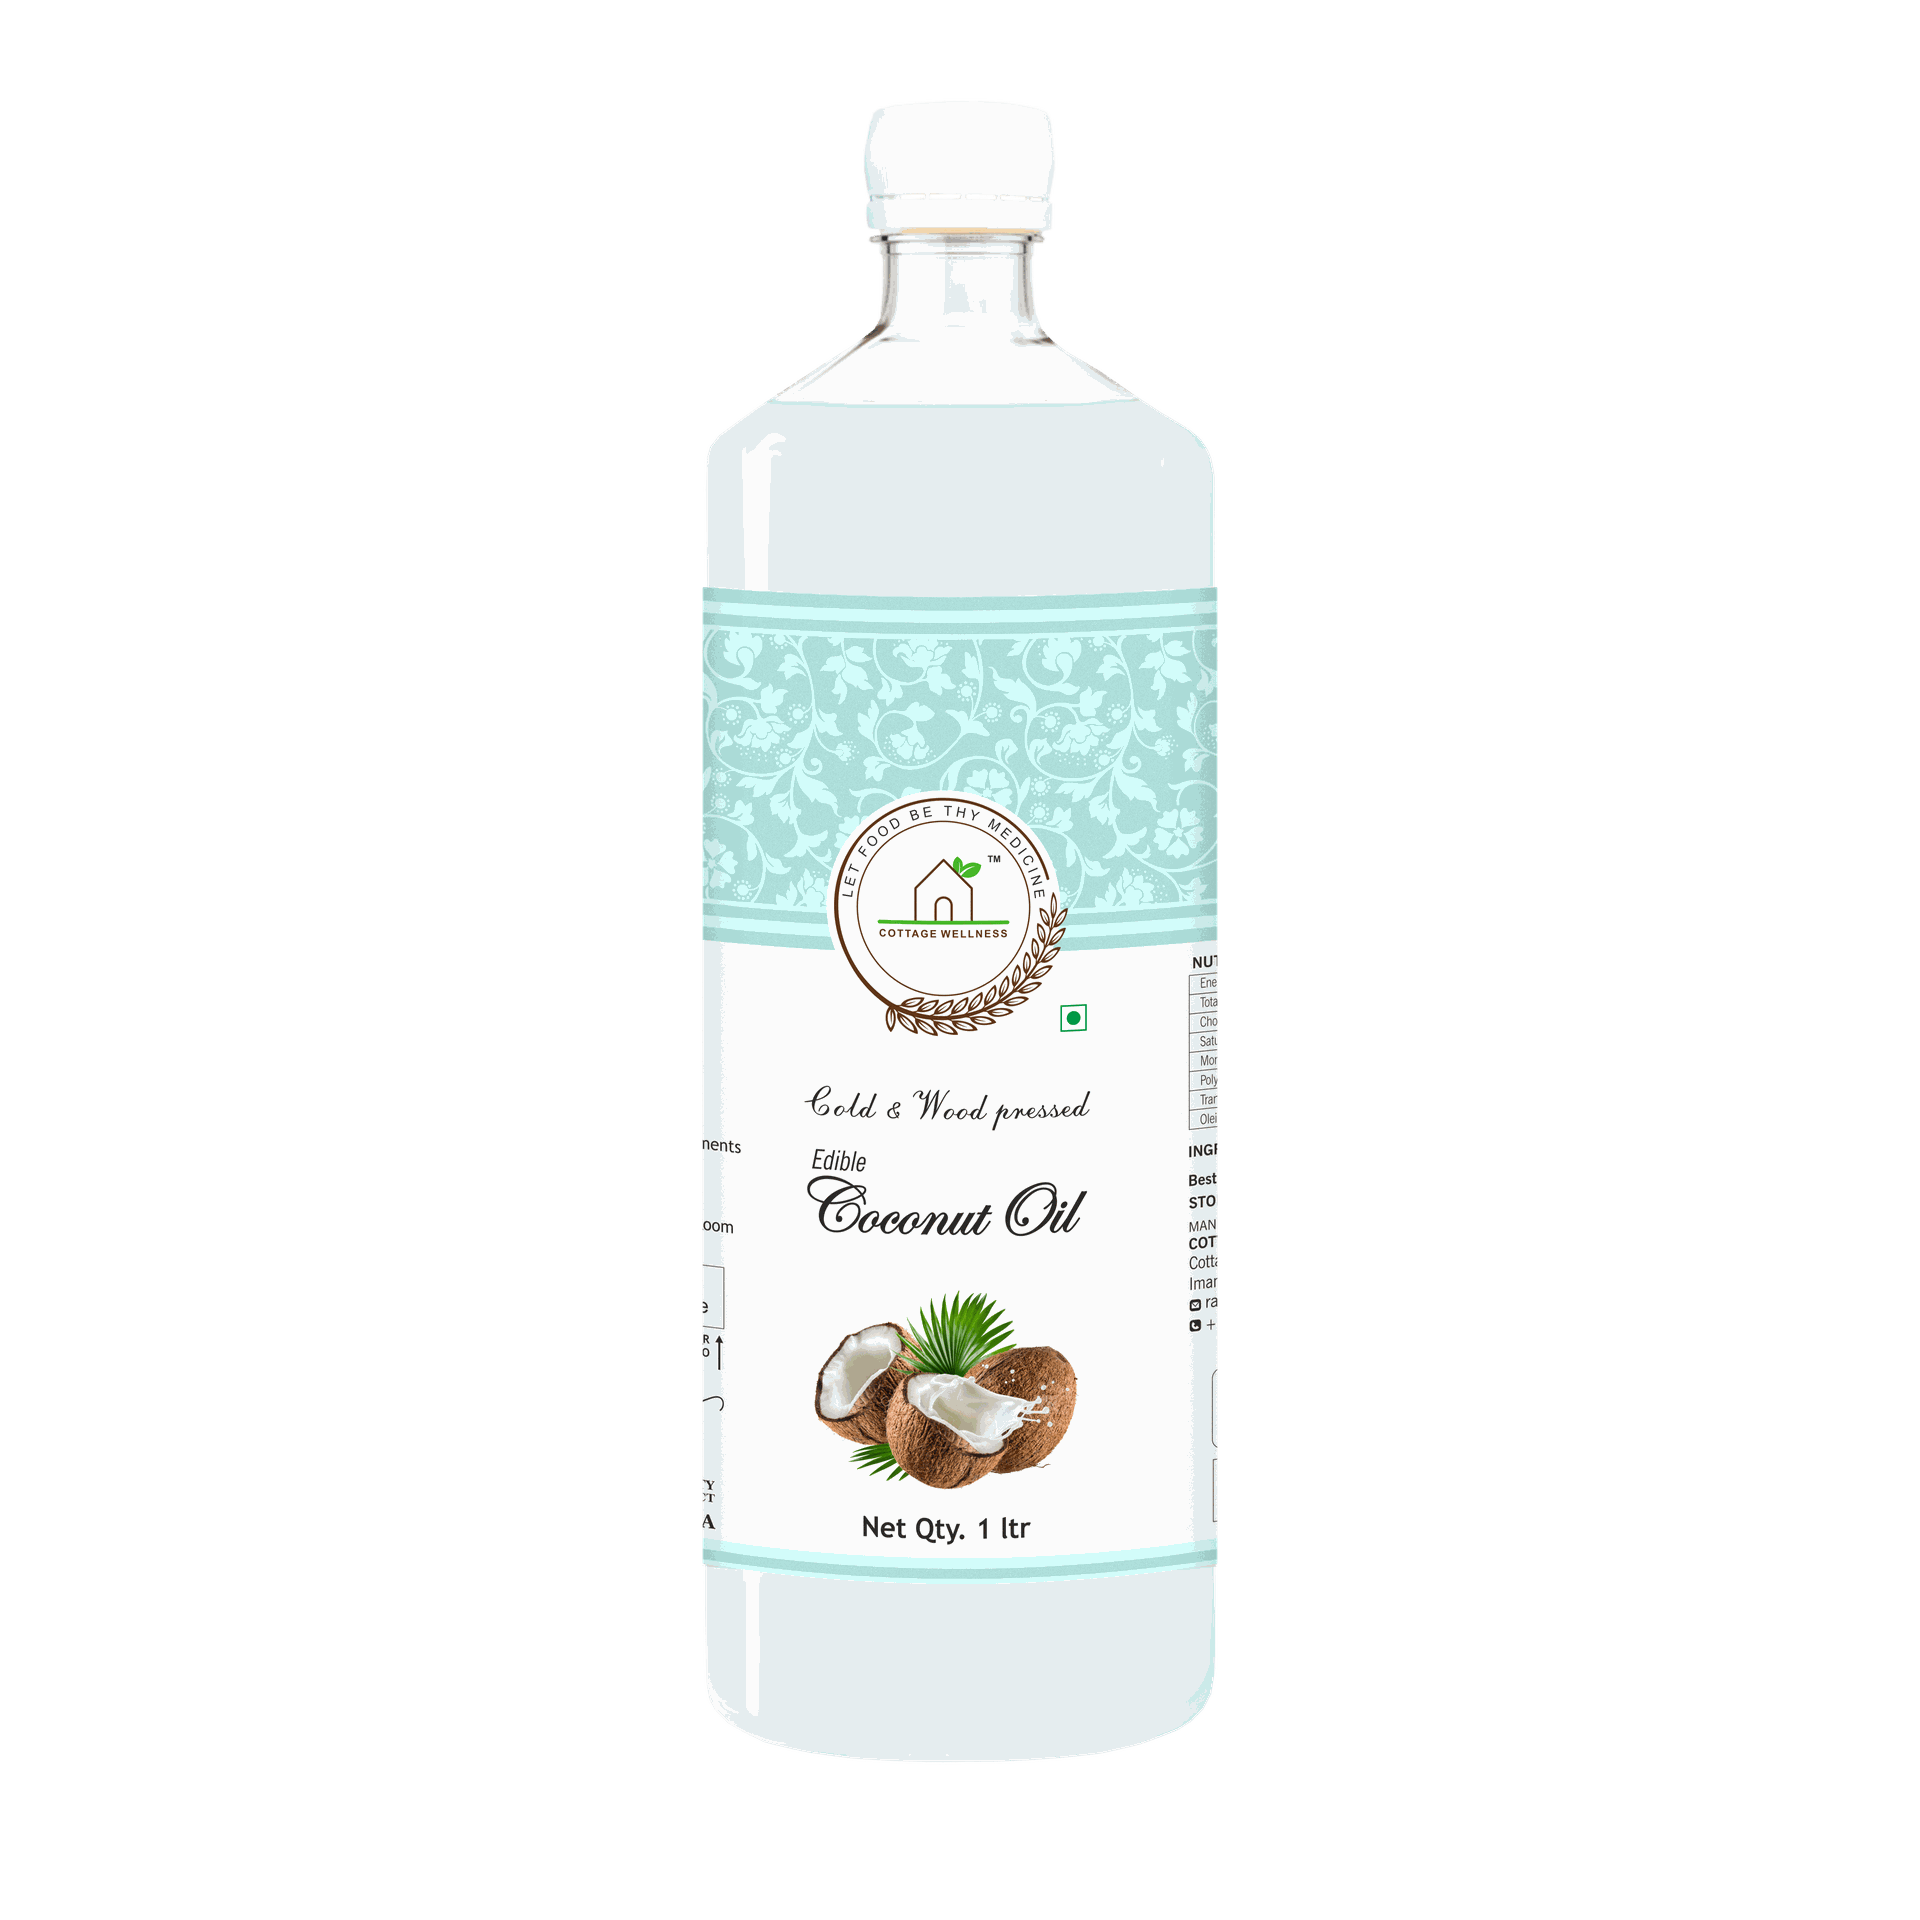 Cottage Wellness Coconut Oil Cold and Wood Pressed Edible 1Litre - hfnl!fe